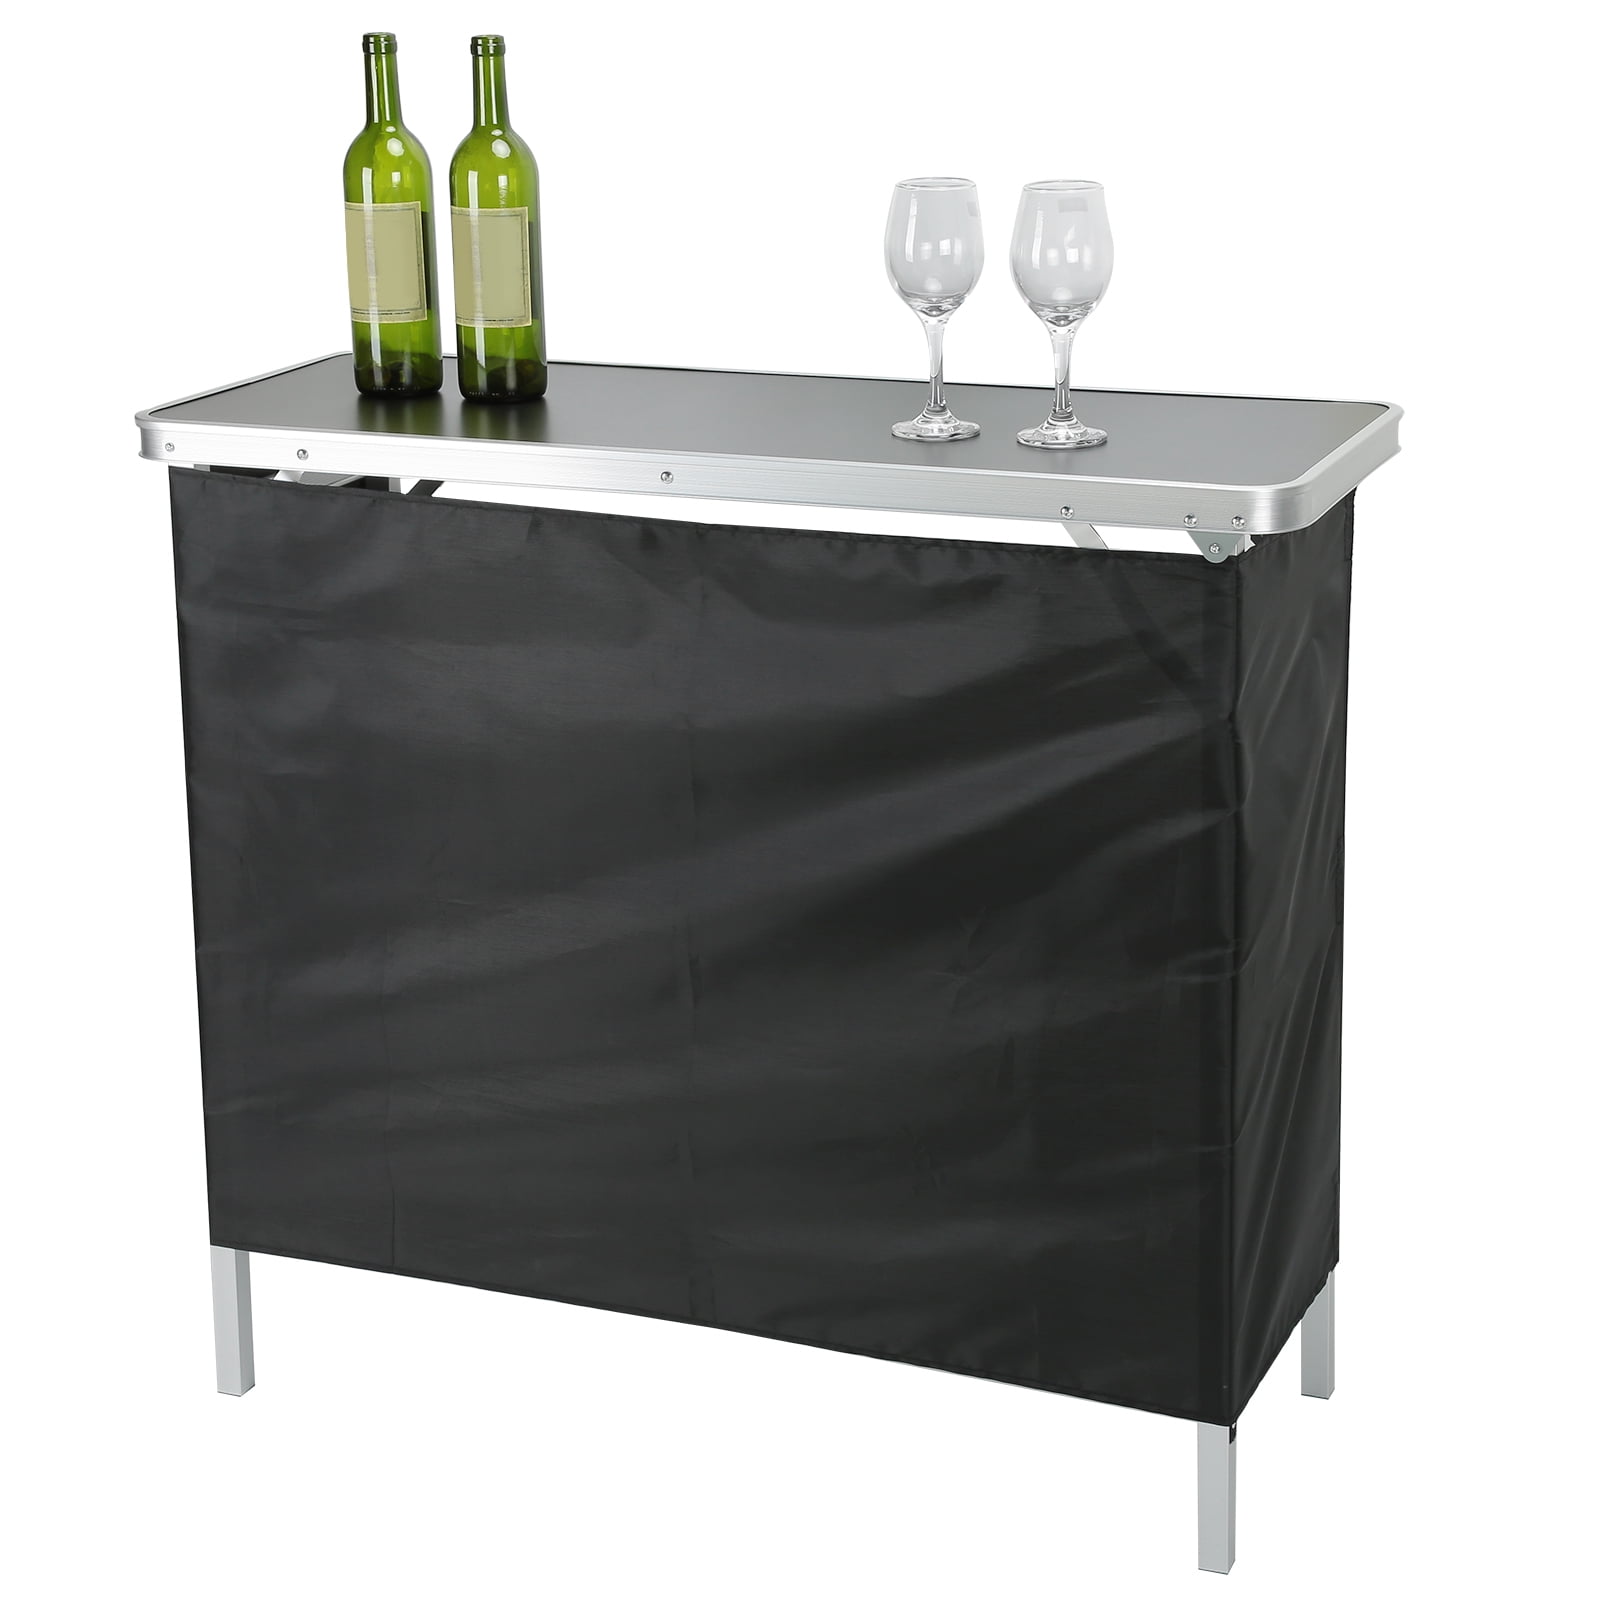 Octpeak Portable Party Bar Table for Indoor/Outdoor,Multipurpose Folding Storage Table,38.2 x 15.0 x 34.6 inch